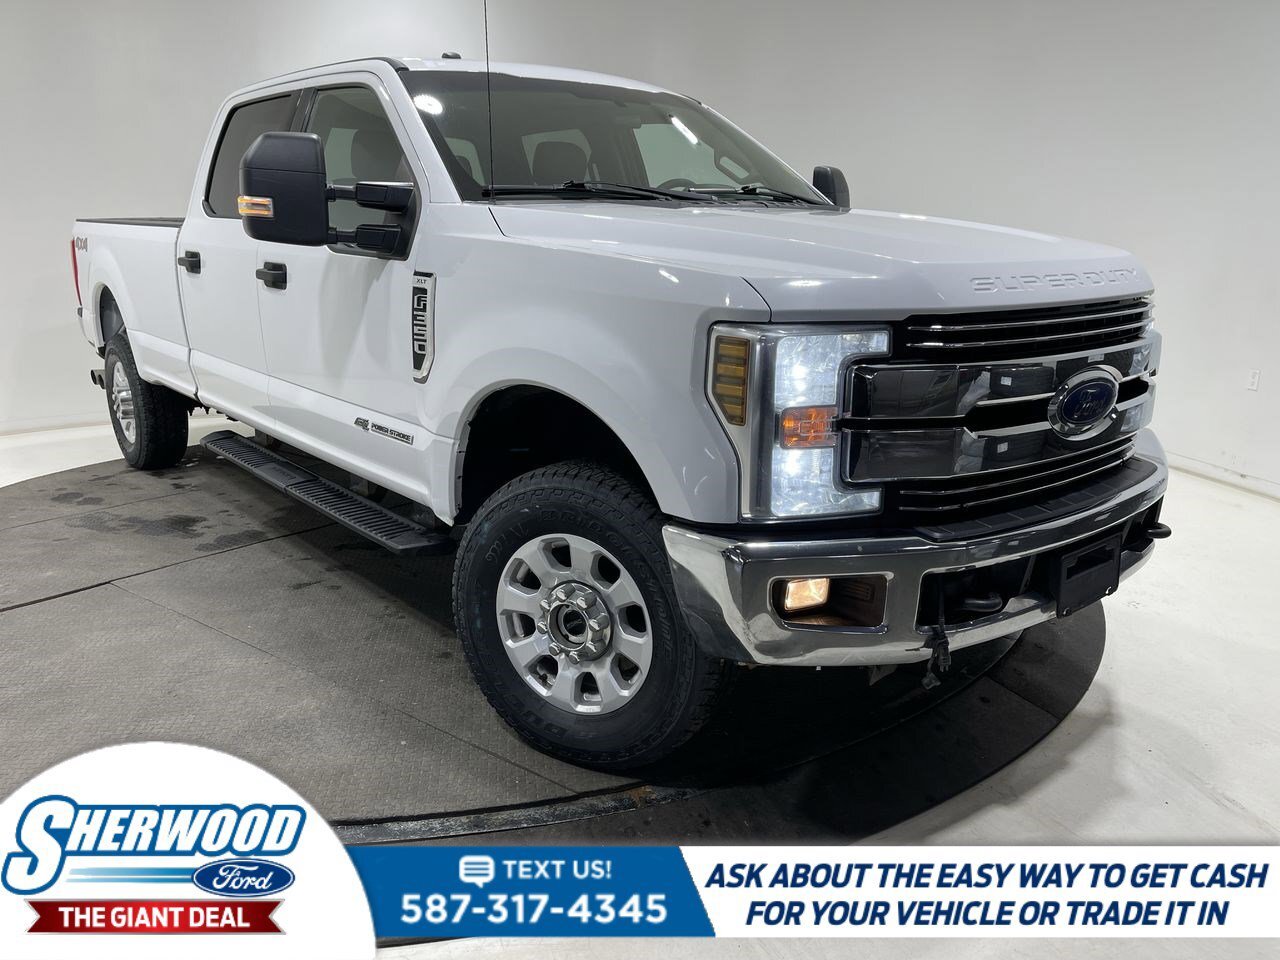 2018 Ford F-350 XLT - $0 Down $229 Weekly